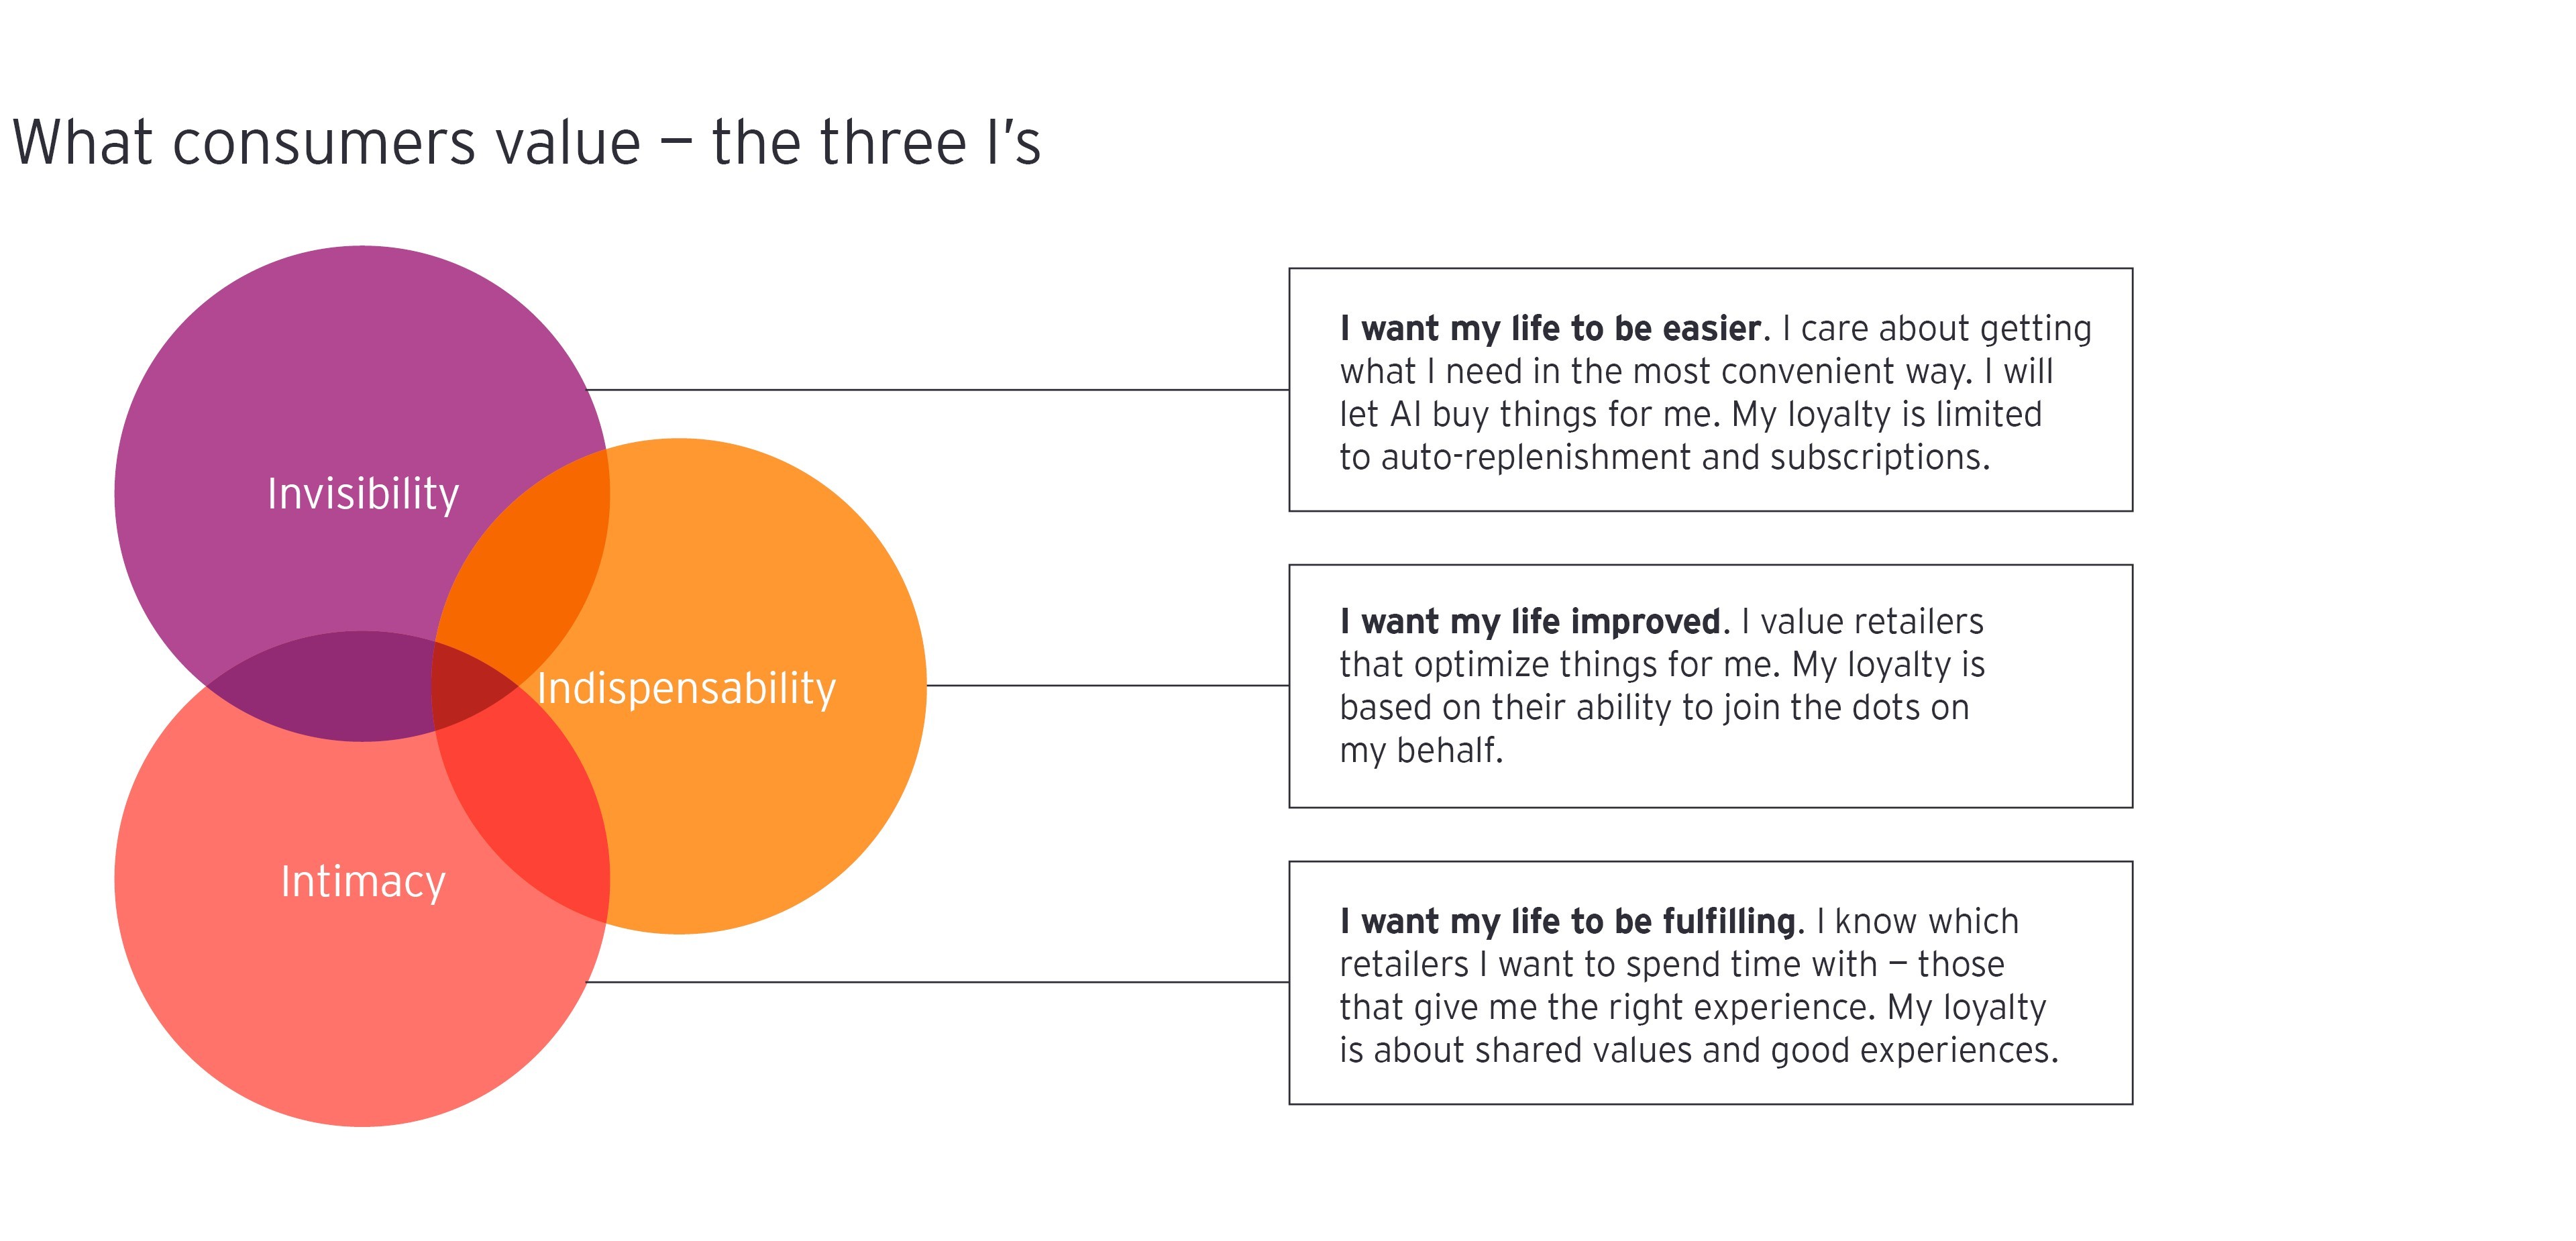 What consumers value: the three I's